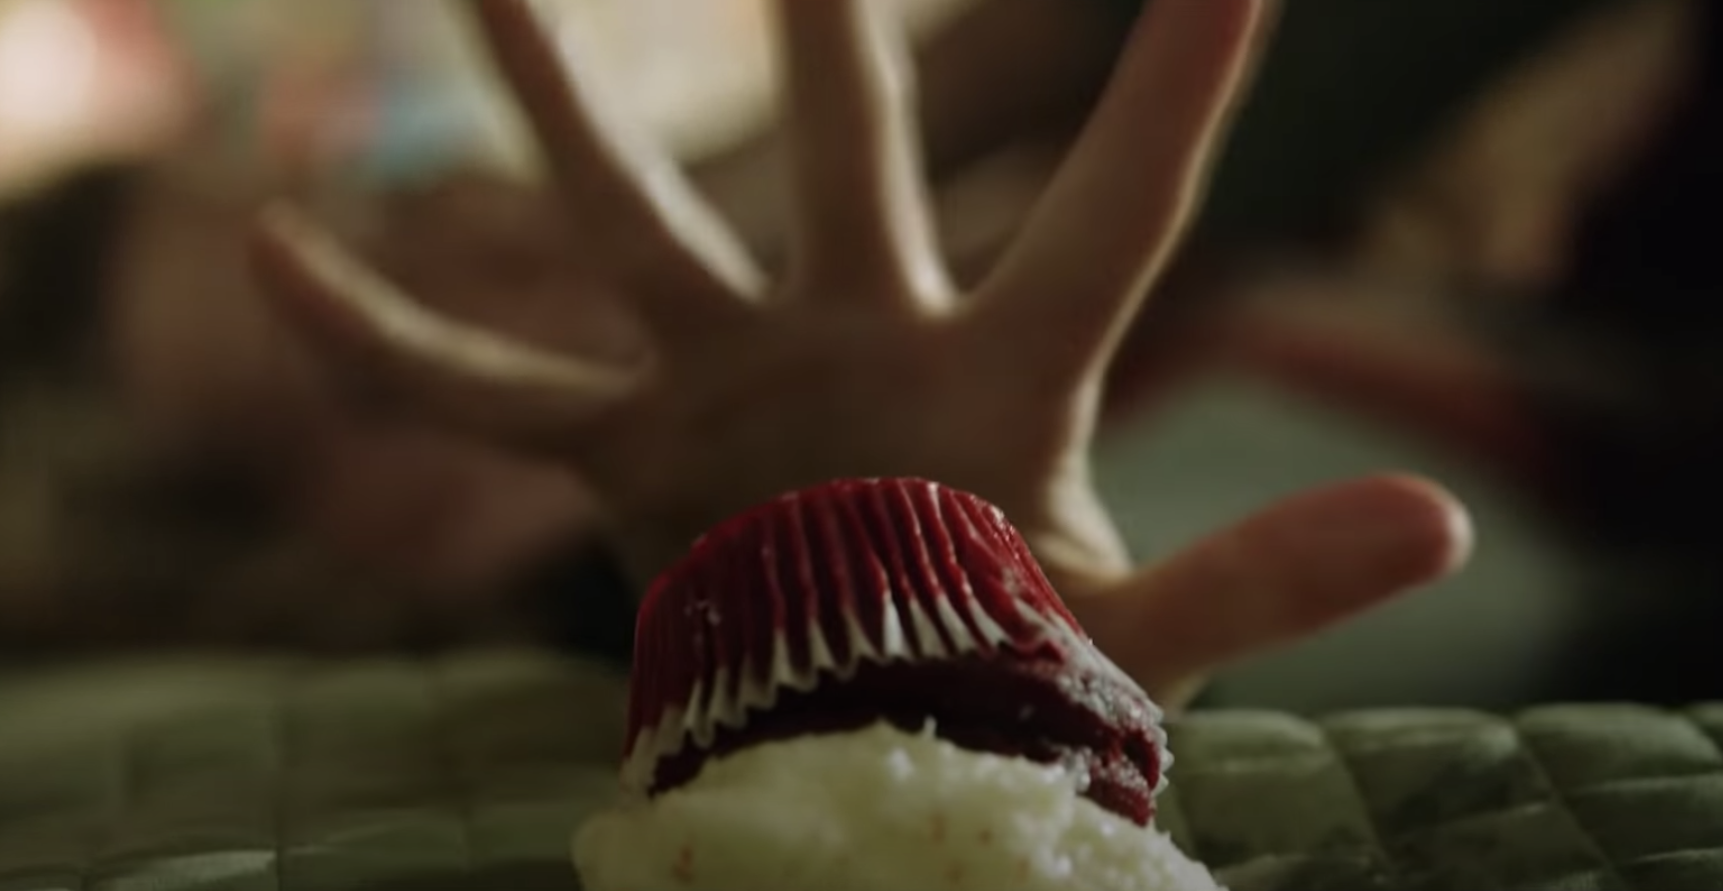 A hand desperately grabs for a cupcake